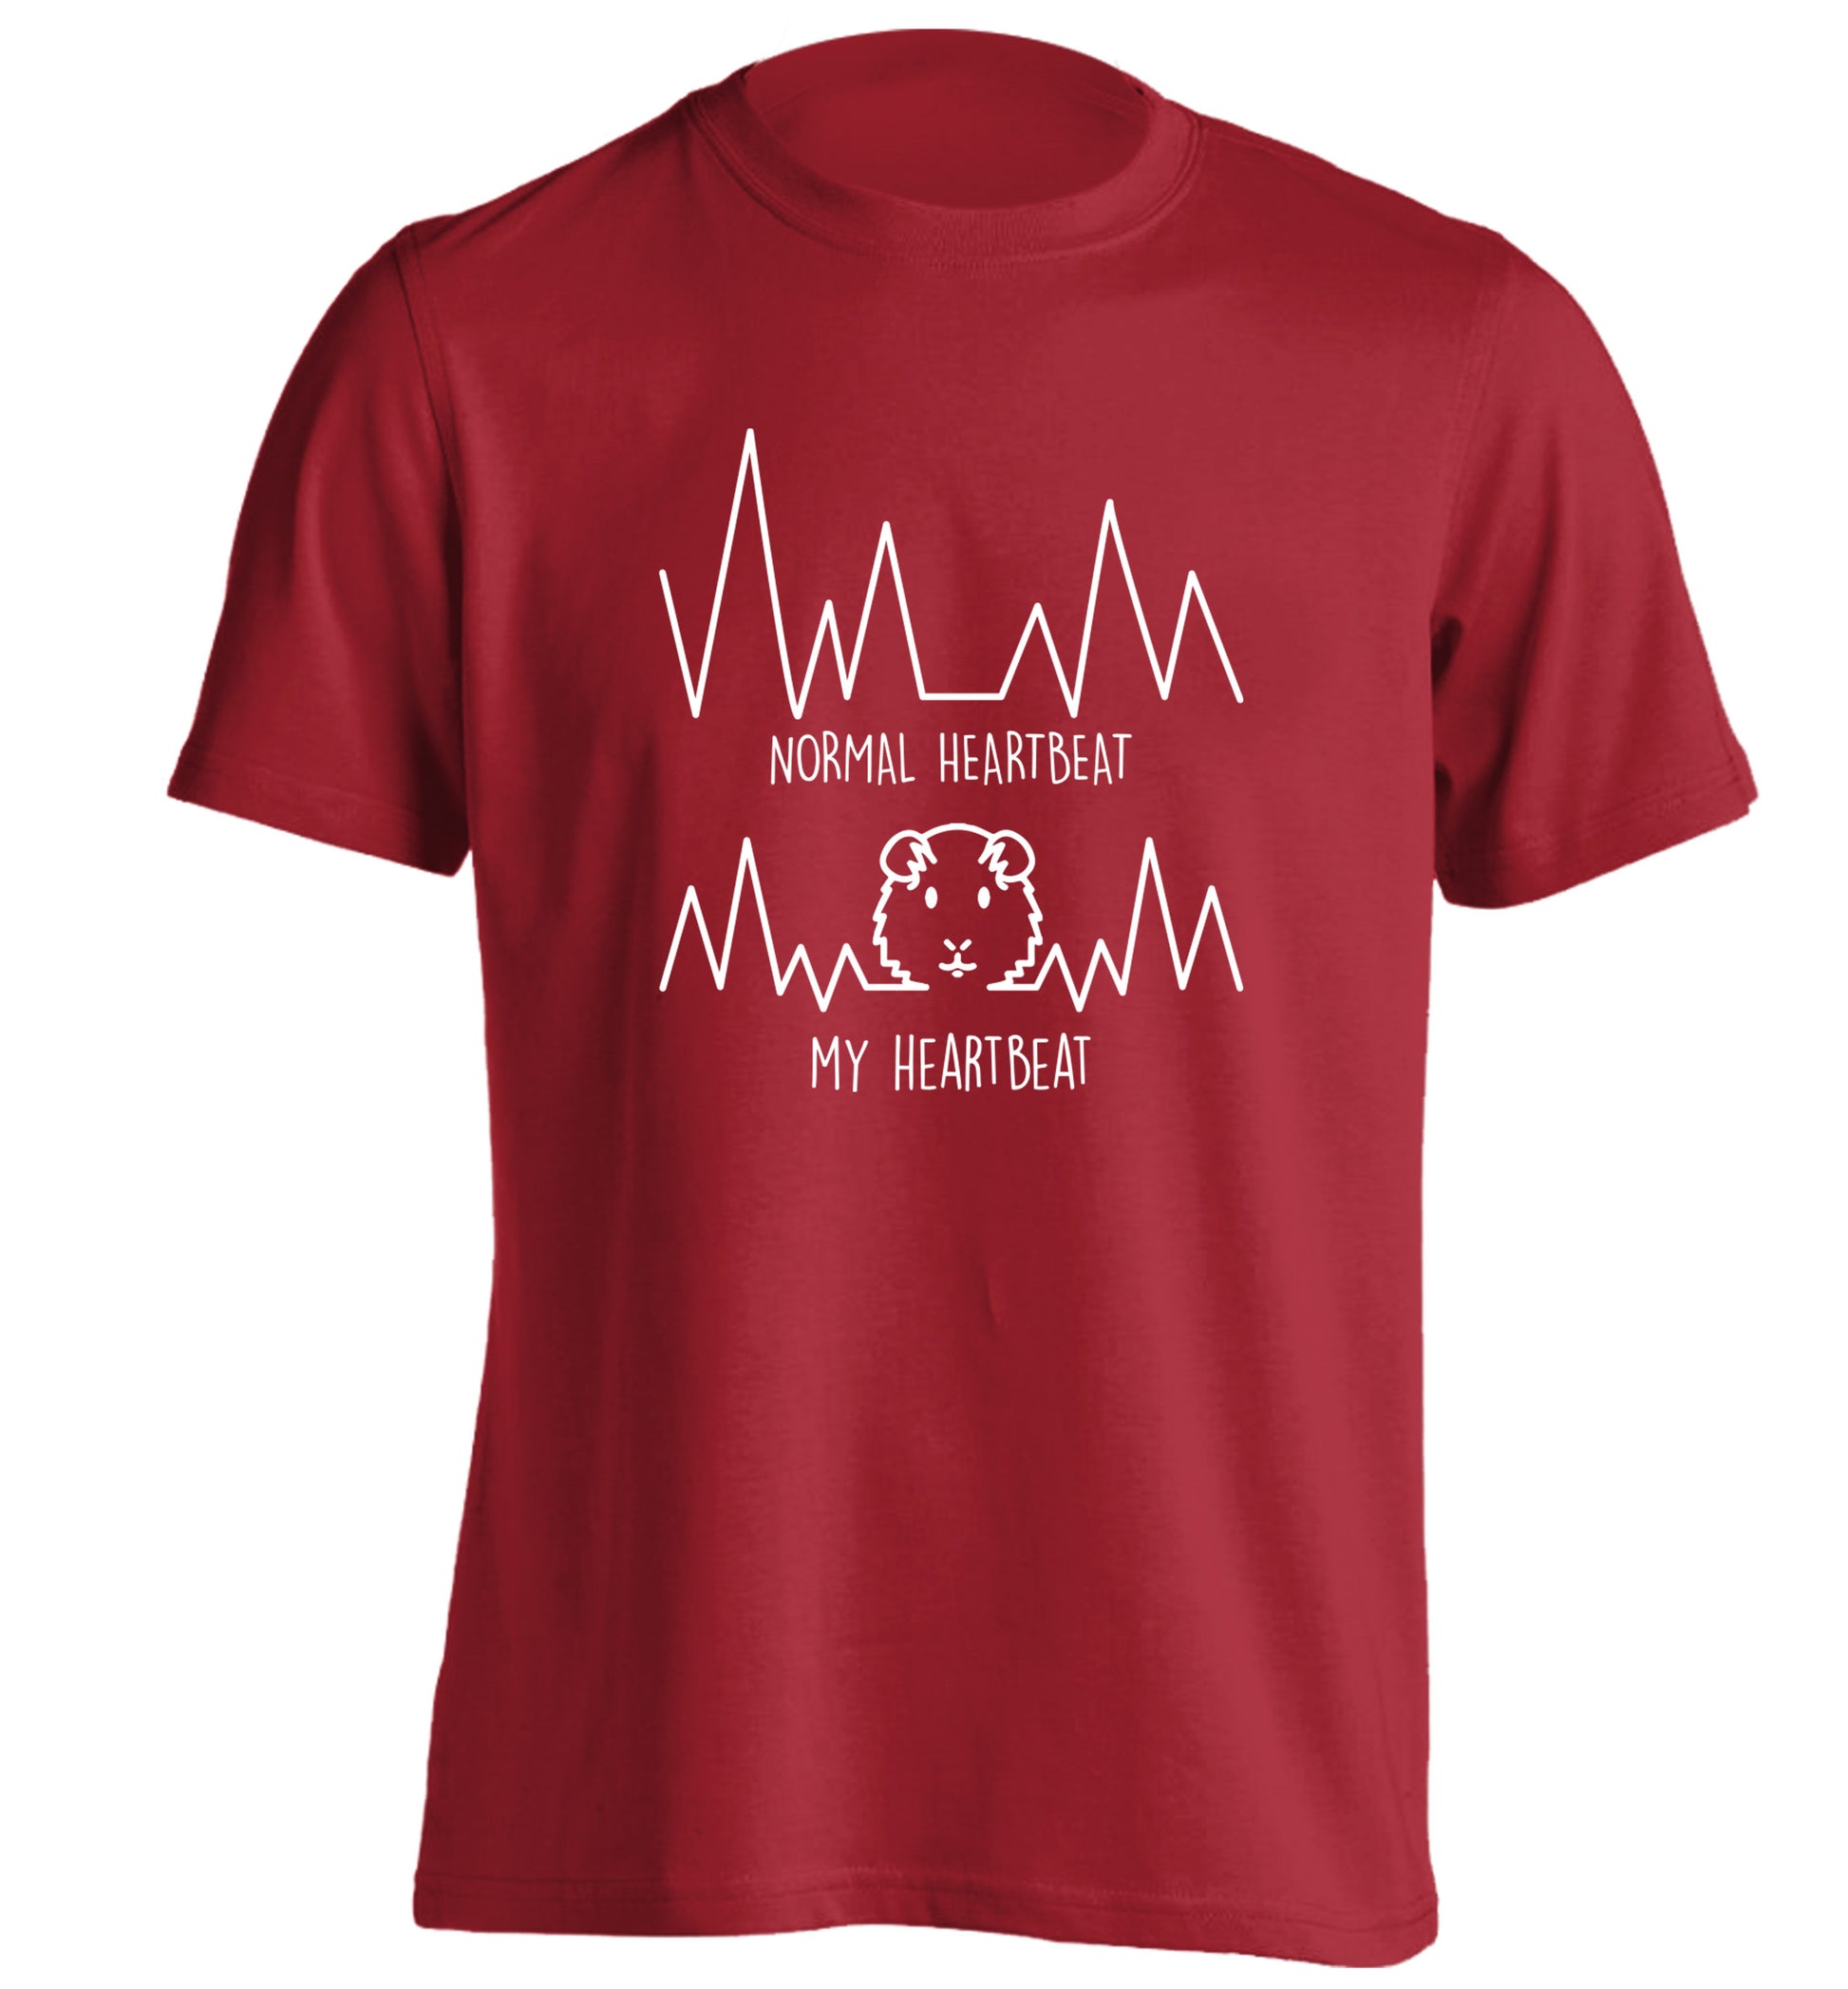 Normal heartbeat vs my heartbeat guinea pig lover adults unisex red Tshirt 2XL